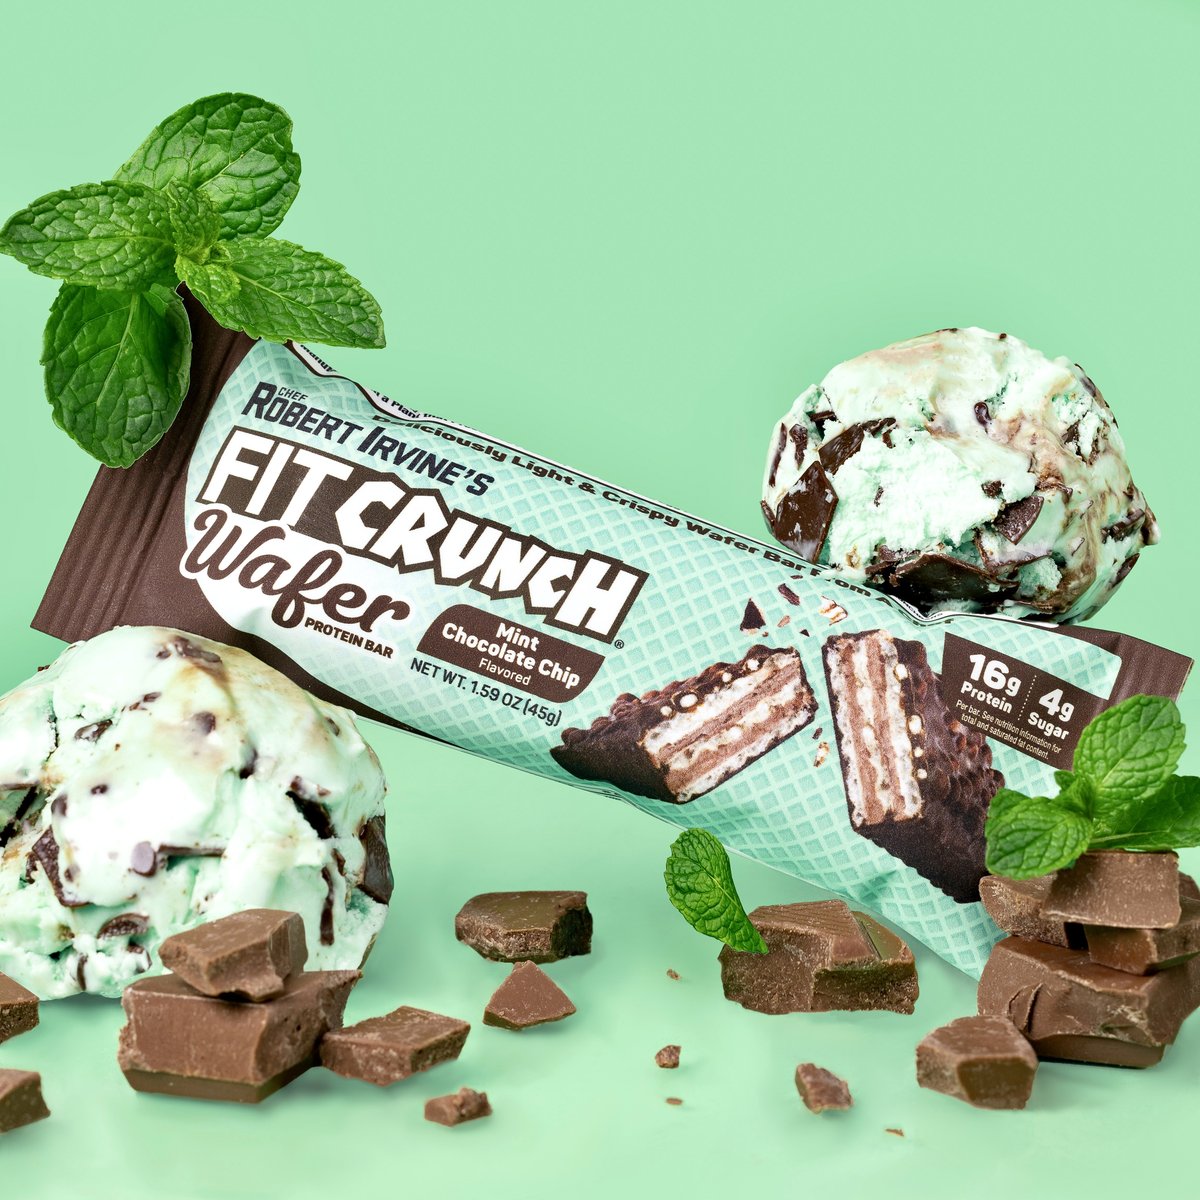 🍃🍫 It is time to break into something delicious! Indulge in our NEW Mint Chocolate Chip Wafer Bar that is NOW AVAILABLE on Fitcrunch.com #MintToBreak